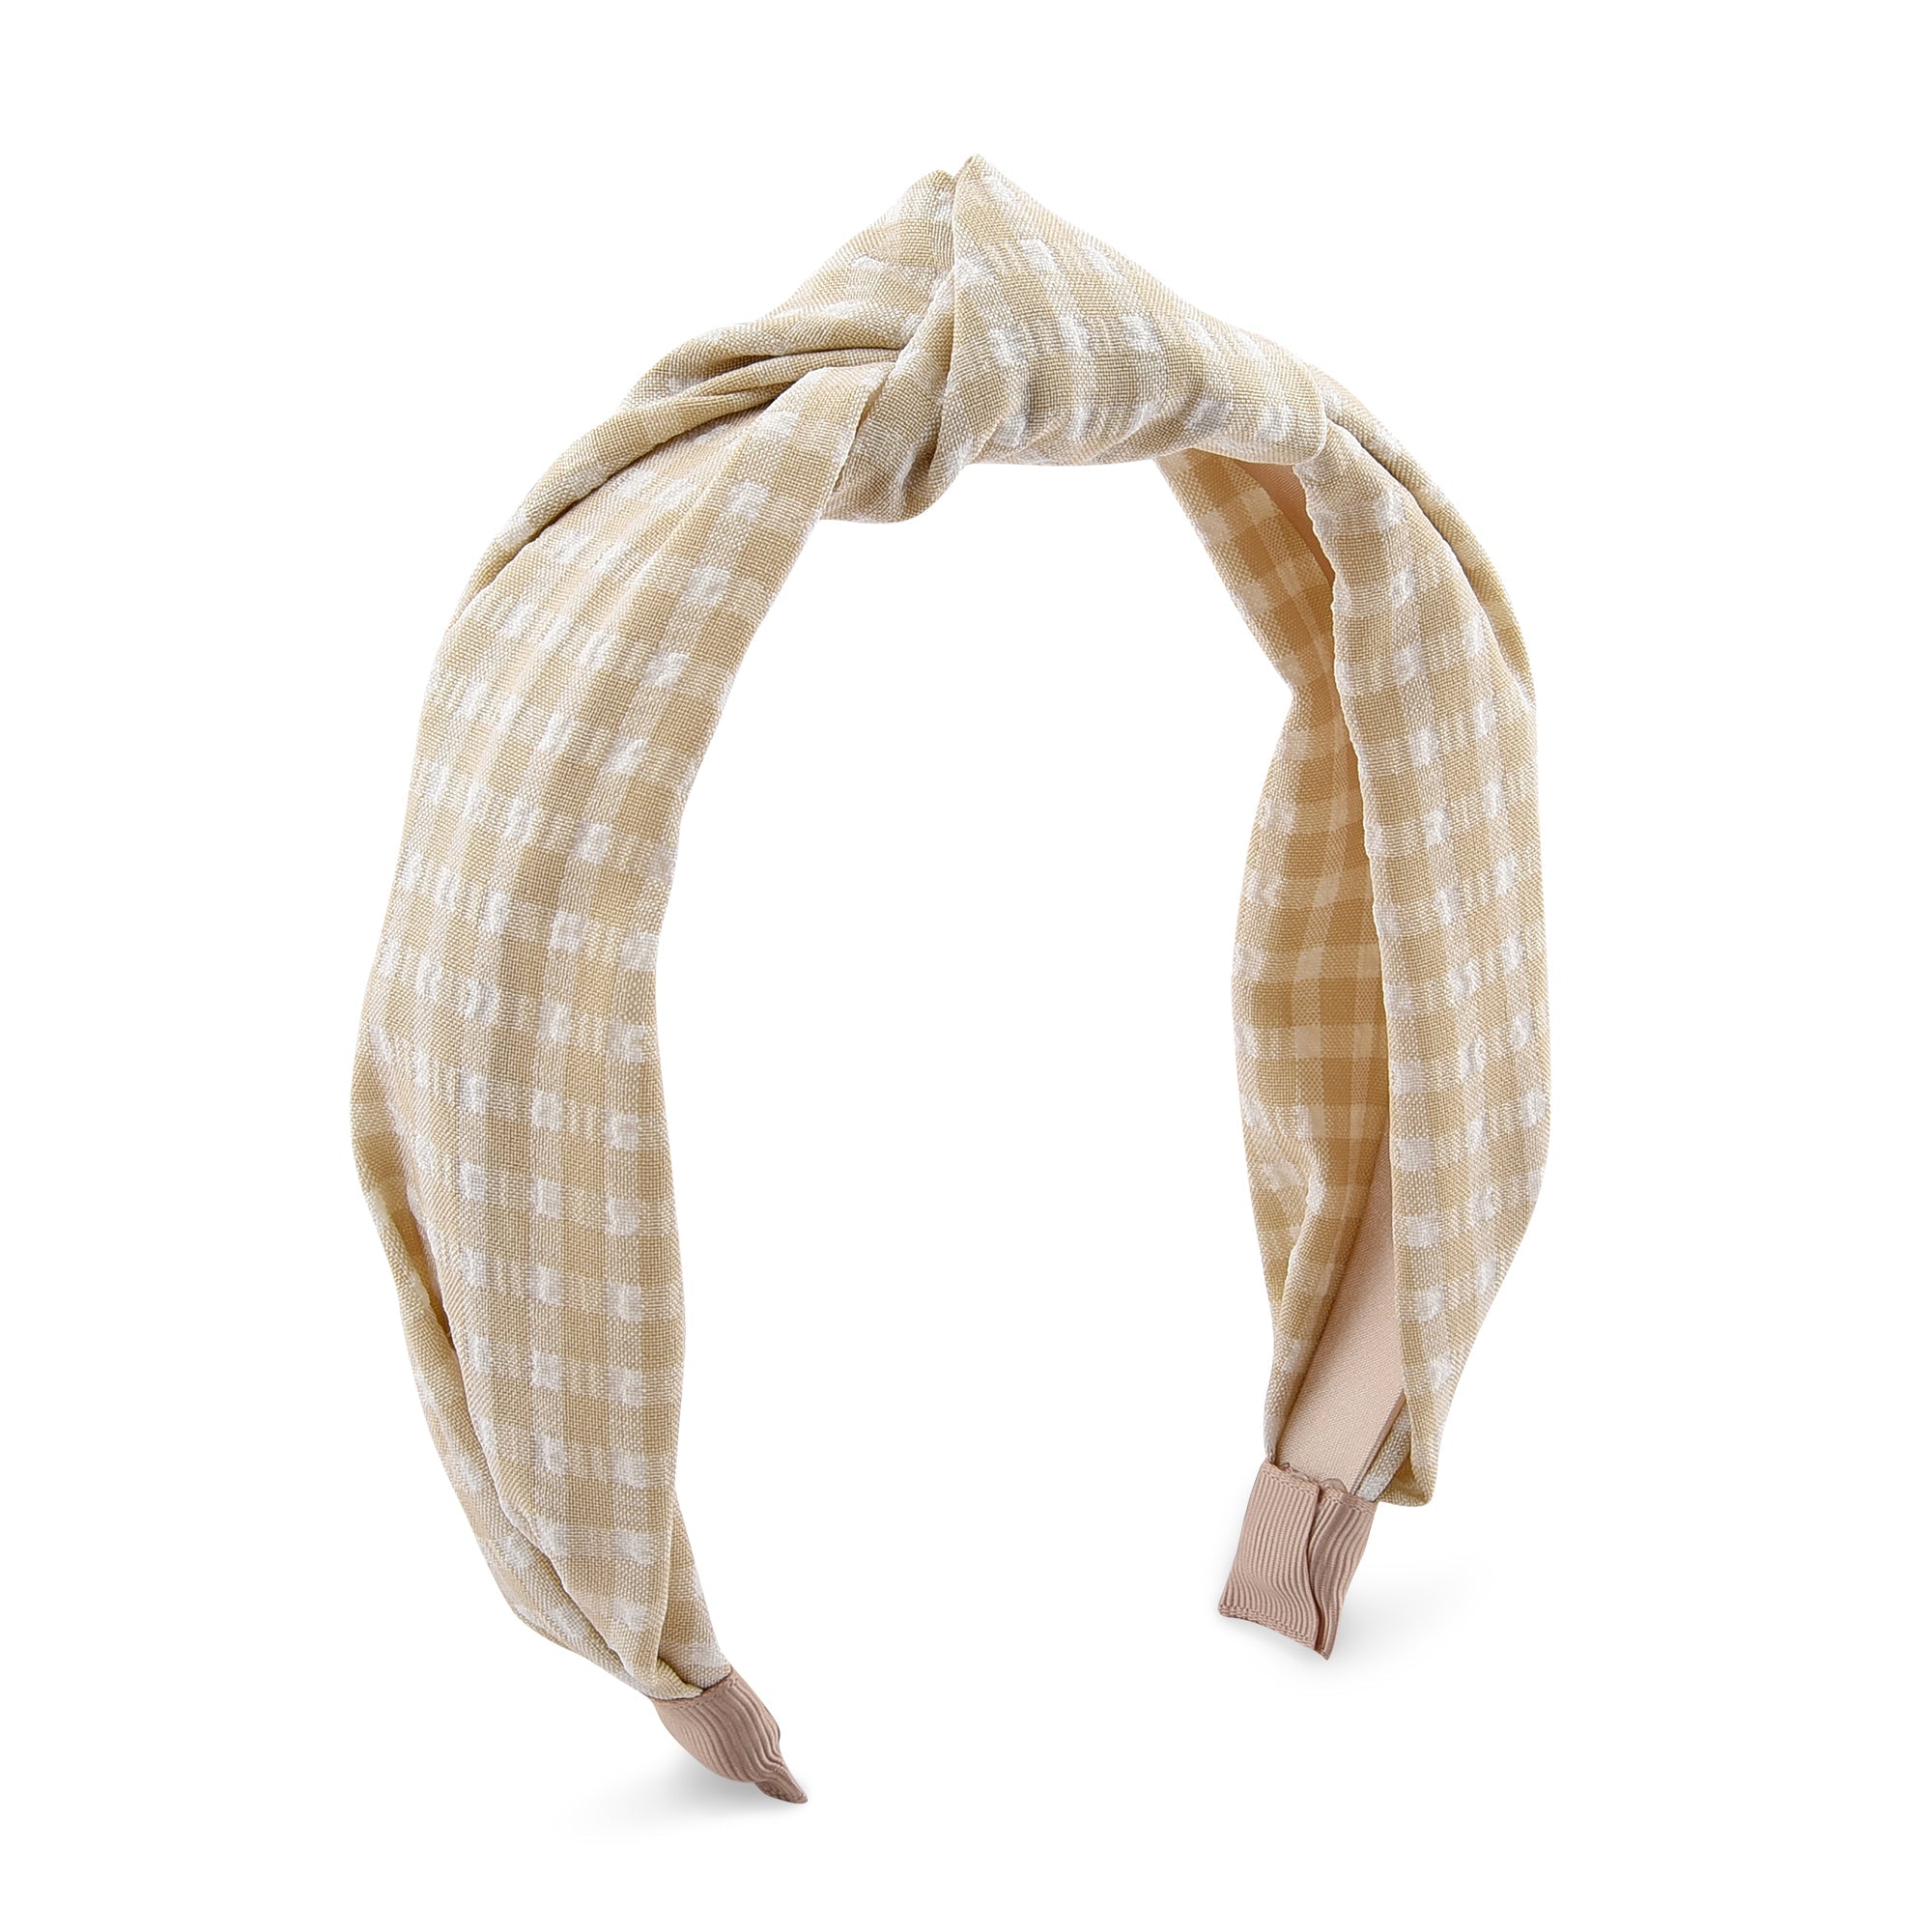 Accessorize London Women's Tan Gingham Knot Alice hair Band